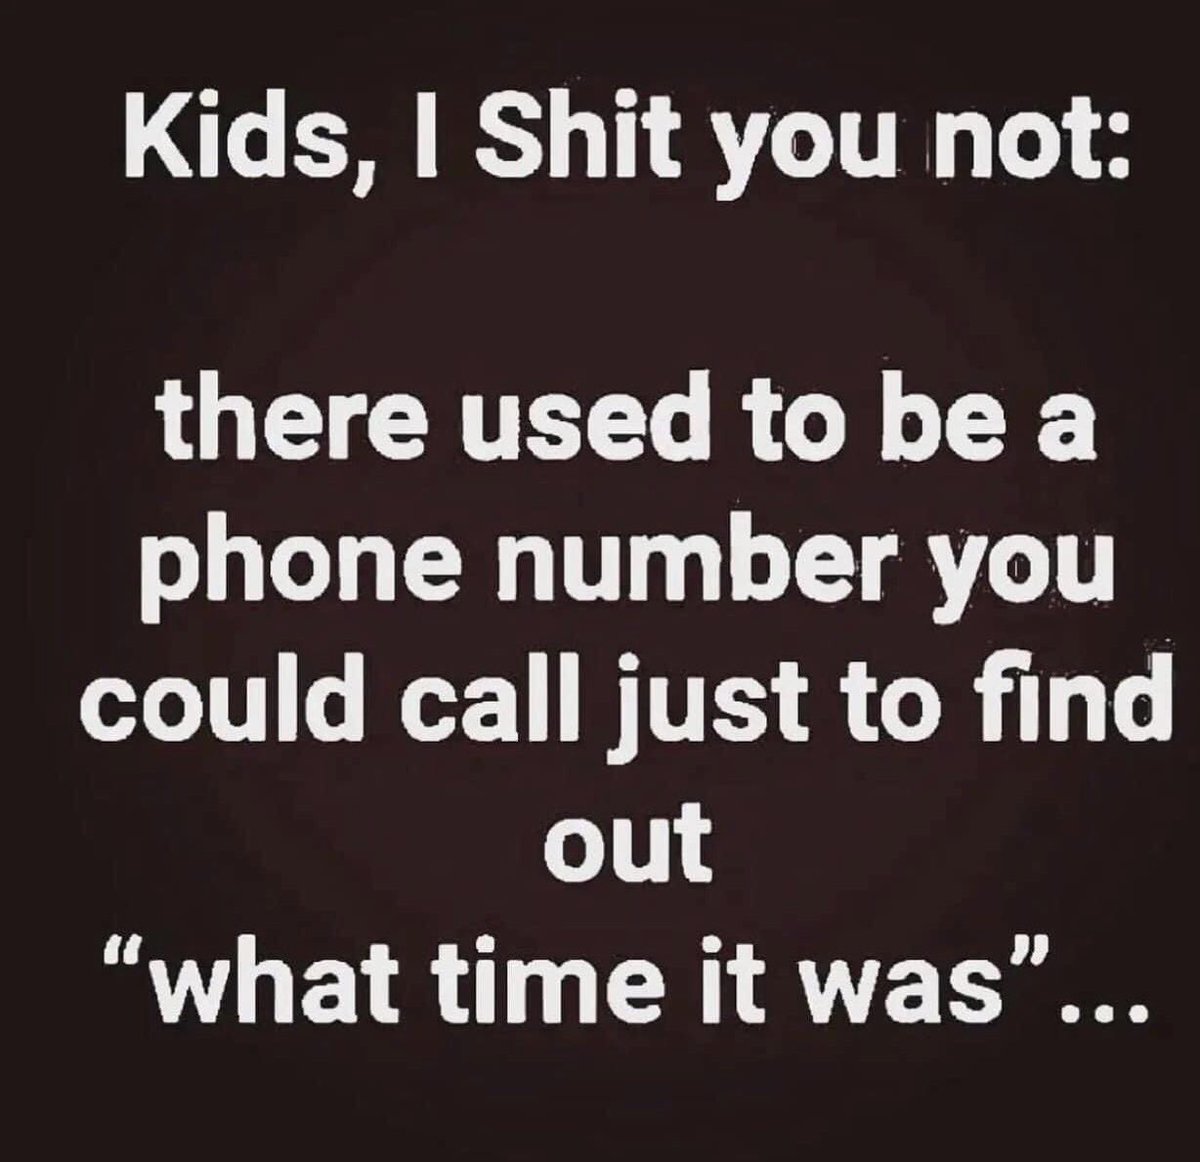 My boys were like… “why not just look at your phone 🤷🏼‍♂️”

Ummm…because we didn’t have phones 😆
#TheSimpleLife ☎️